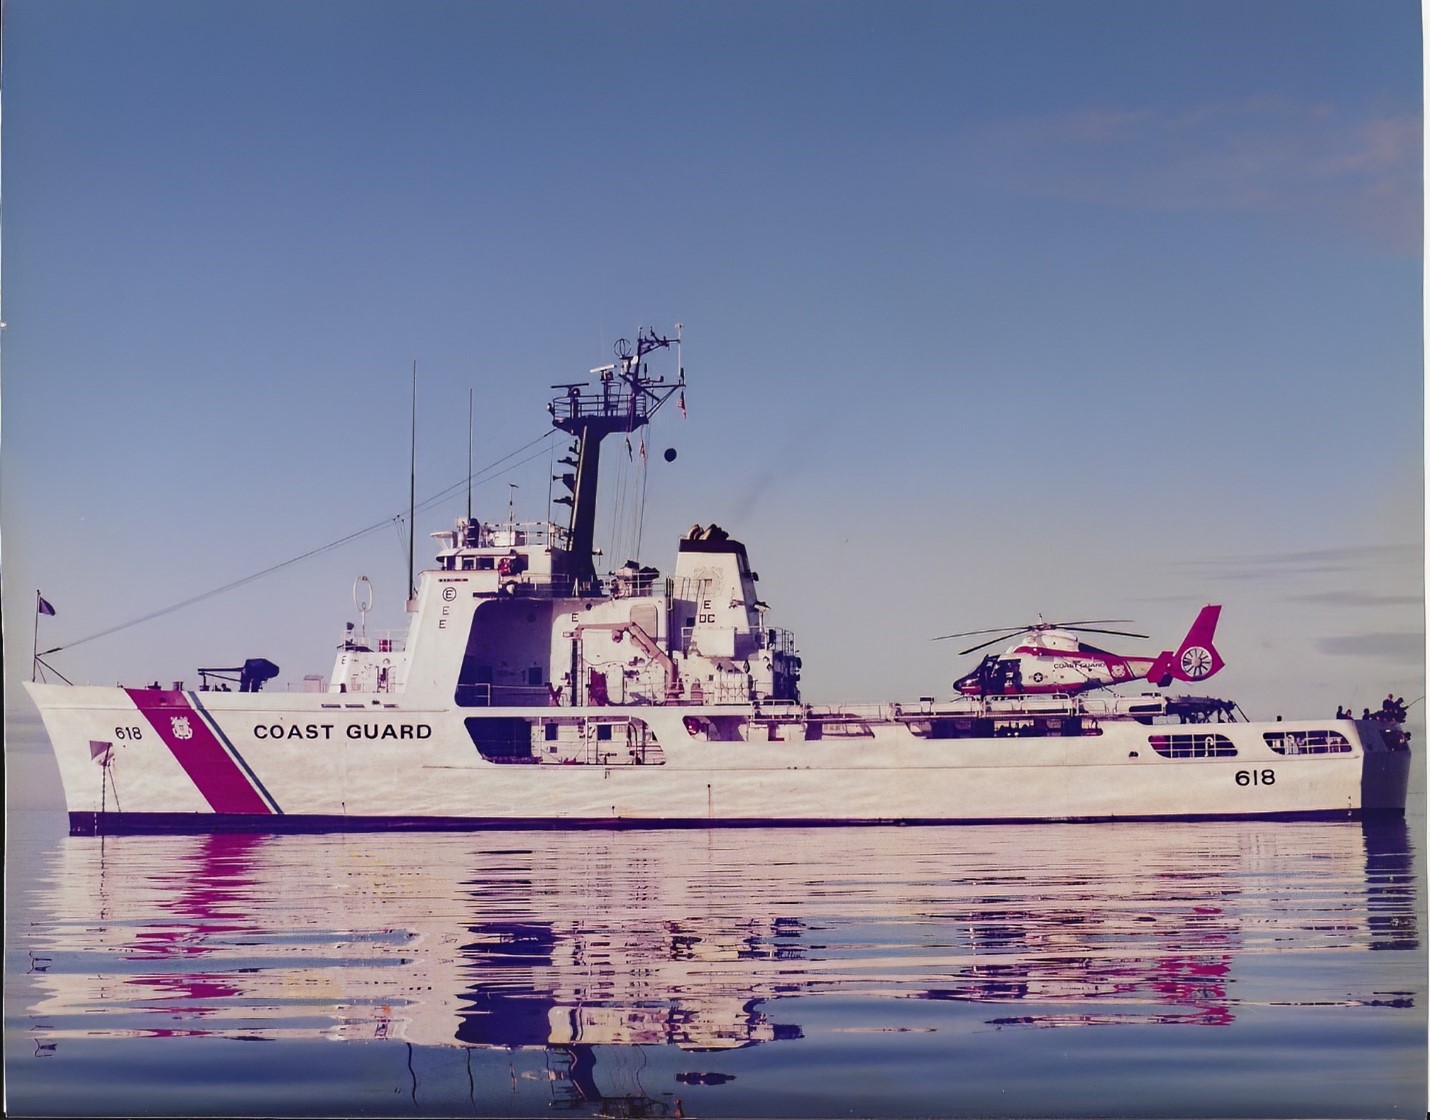 One of the first color photographs of USCGC ACTIVE at anchor with an MH-65 helicopter